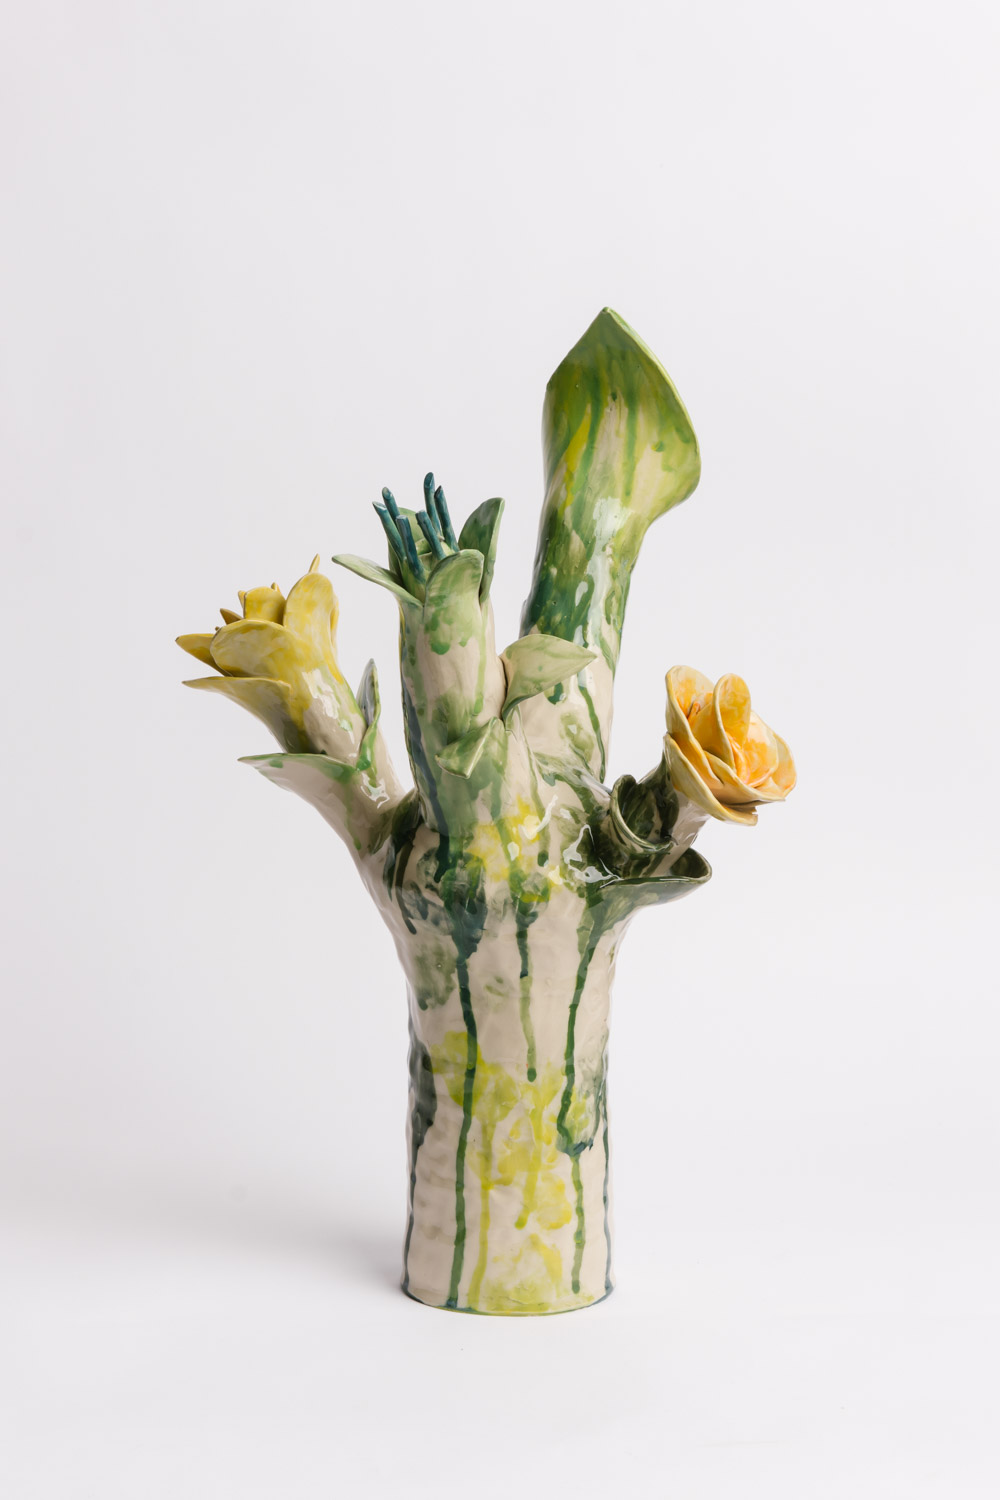 Hand built ceramic vessel emulating a growing plant with four thick stems of flowers reaching for the sky, created by Susan Buret, photo by Samee Lapham